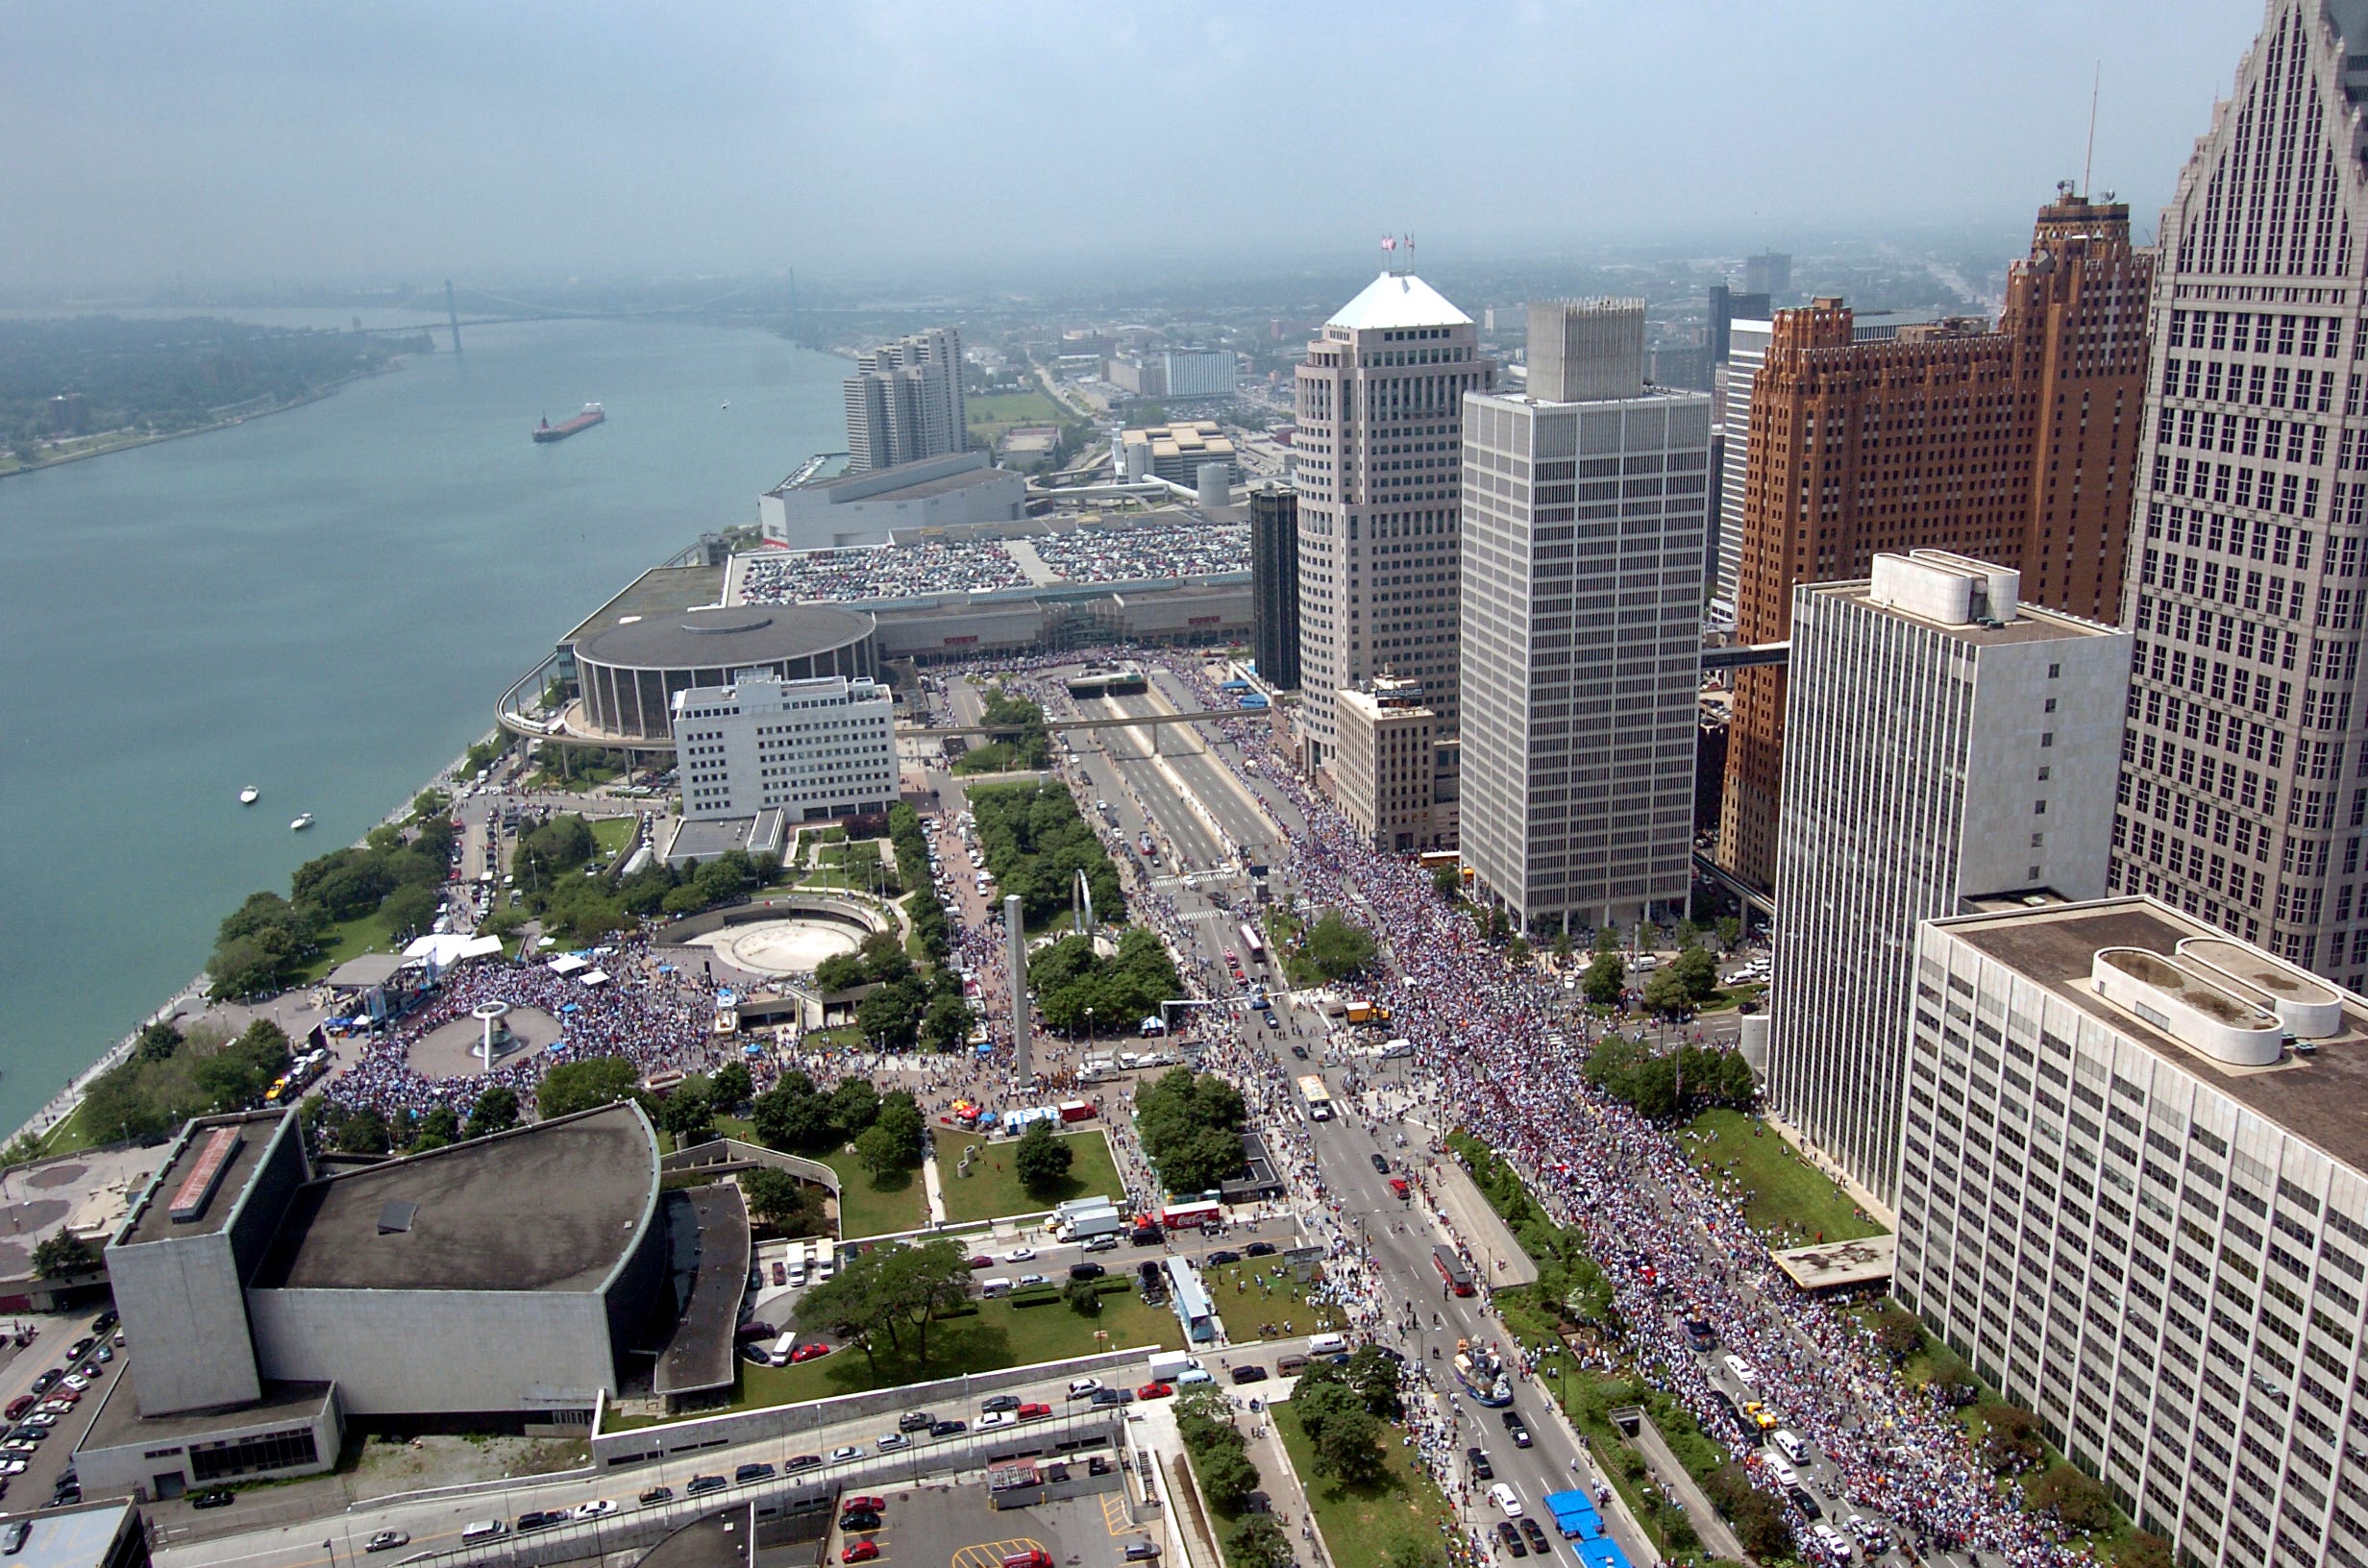 Detroit Pistons championship parade down Jefferson and rally at Hart Plaza.